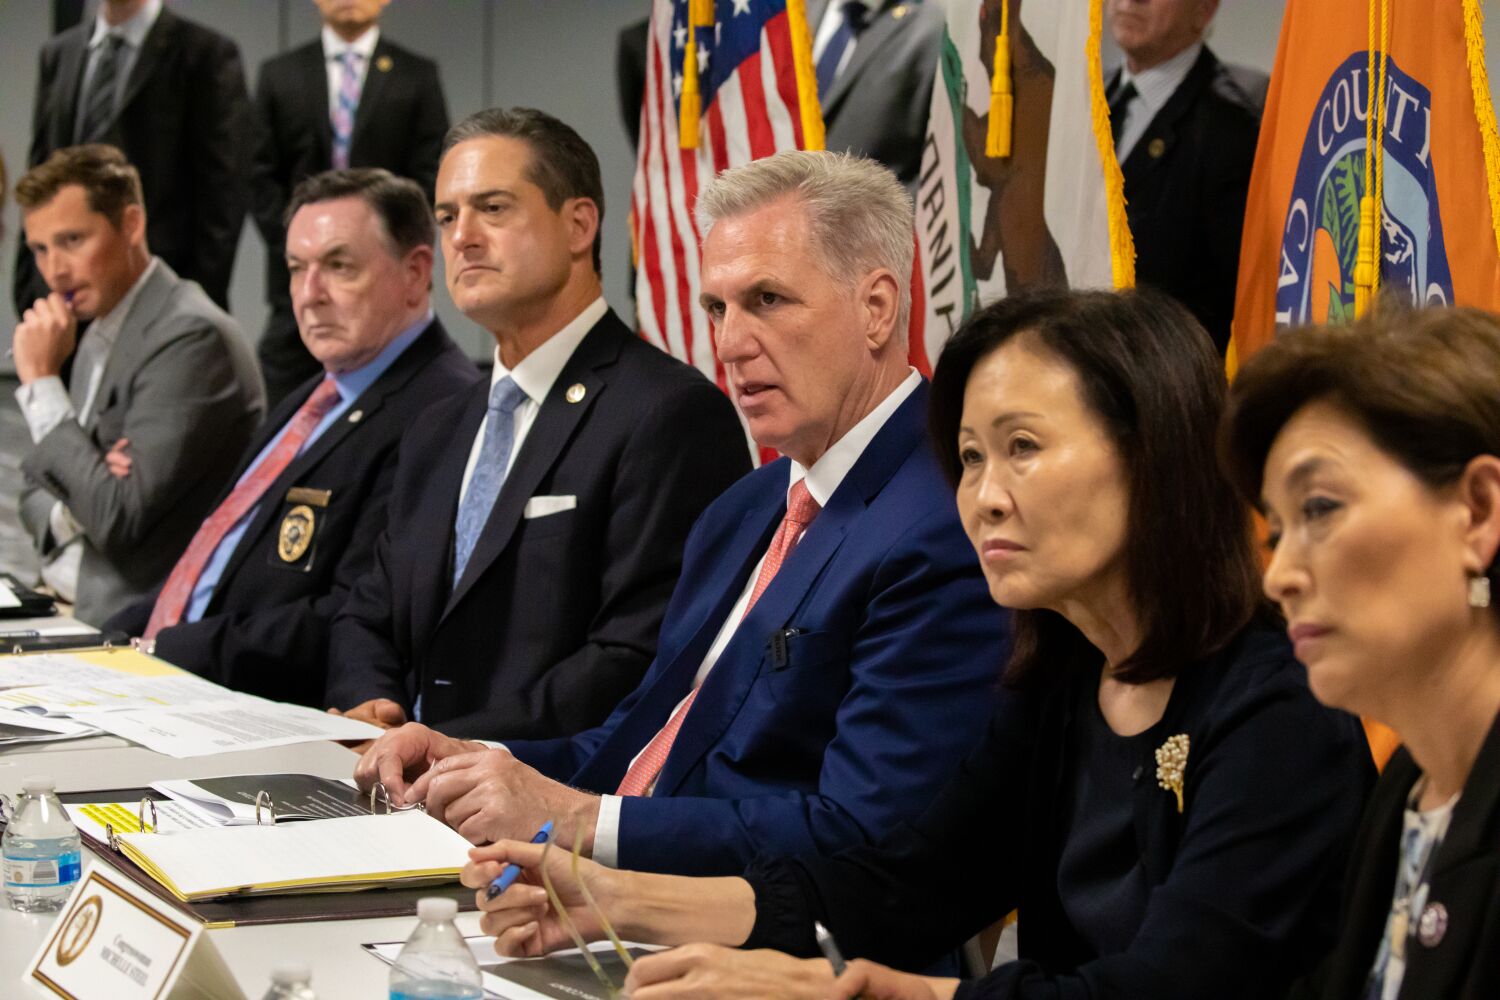 McCarthy visit to Orange County highlights GOP focus on immigration and crime